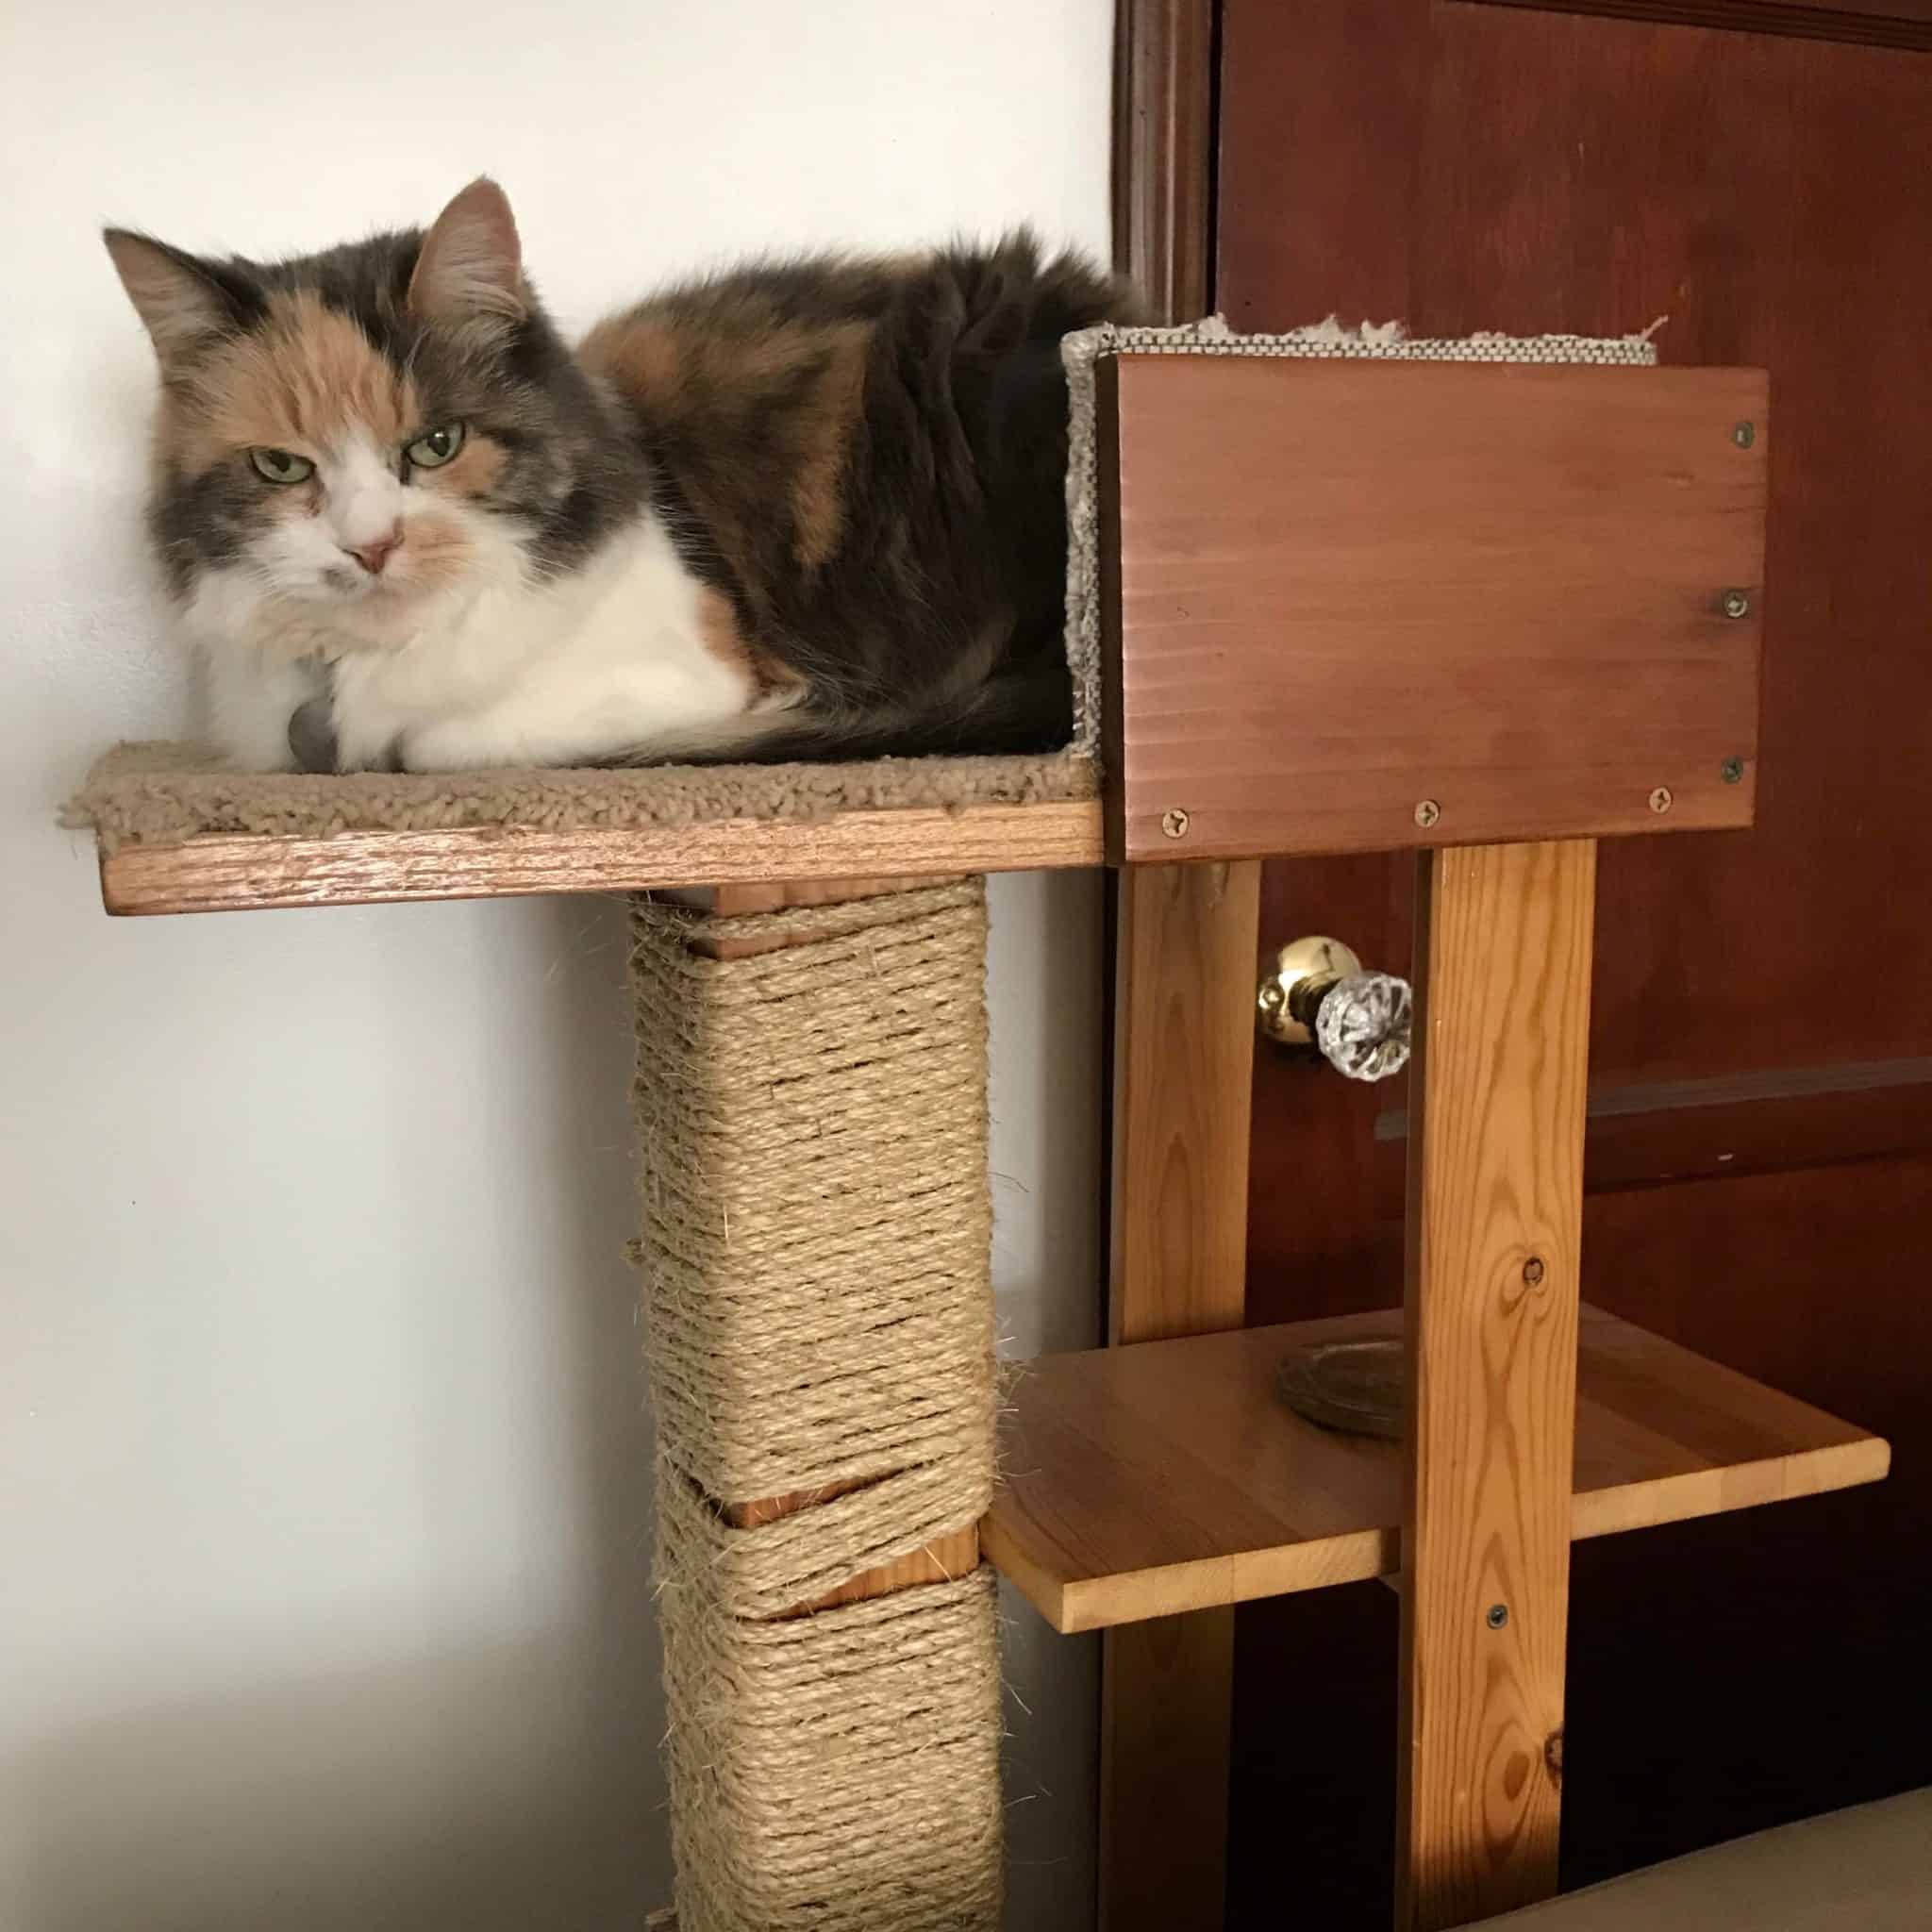 How long does it take to build a cat tree?